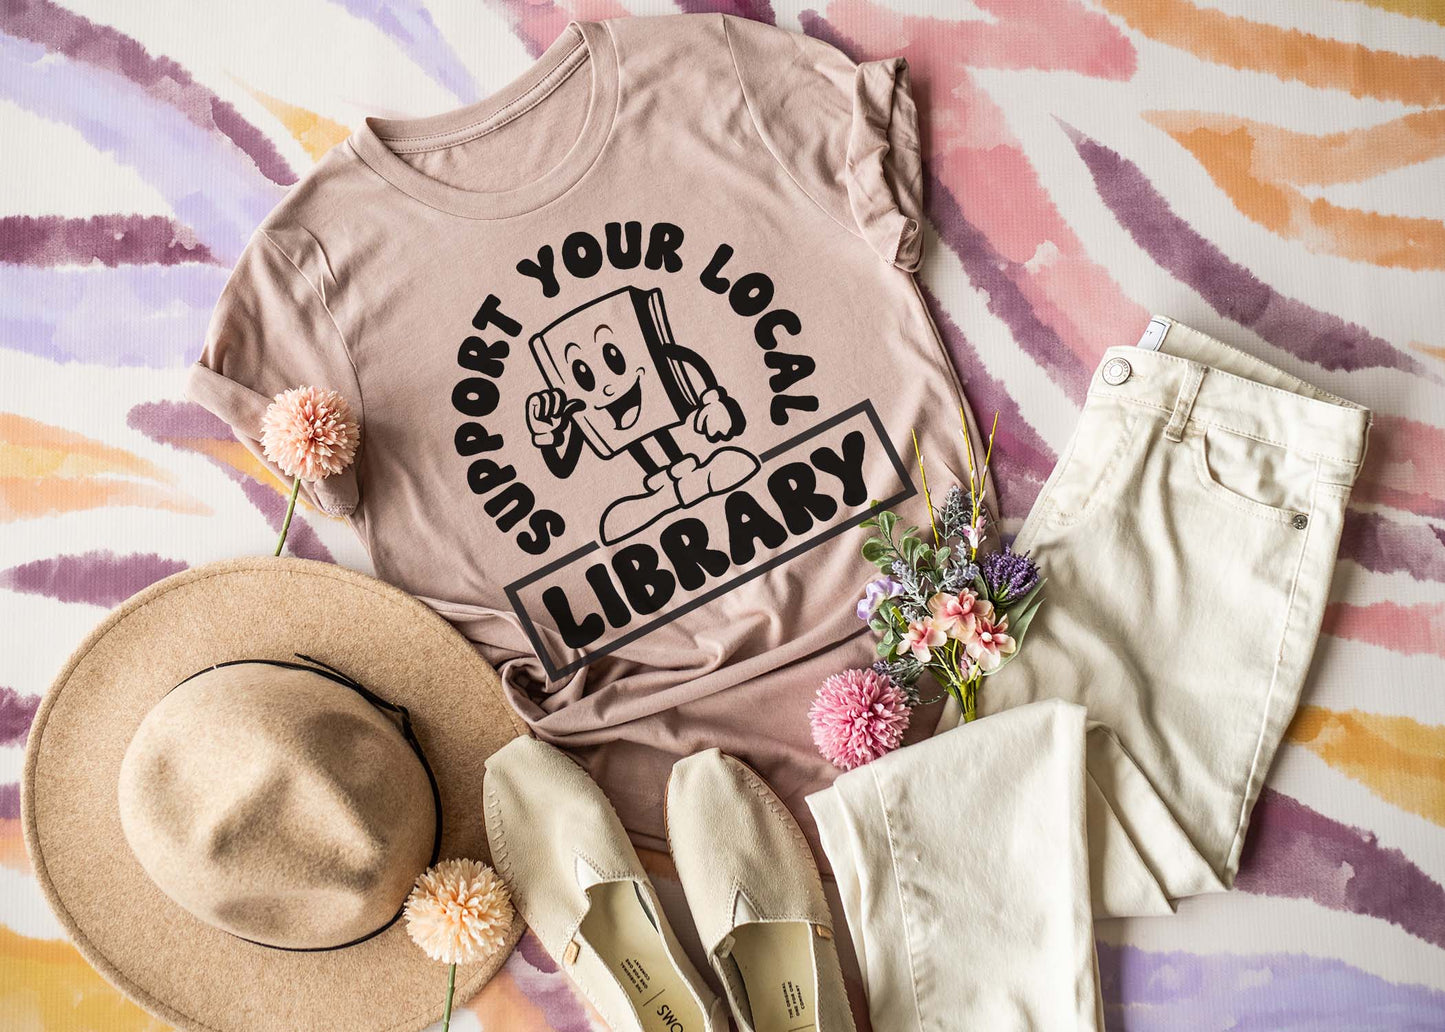 Support Your Local Library | Library | School